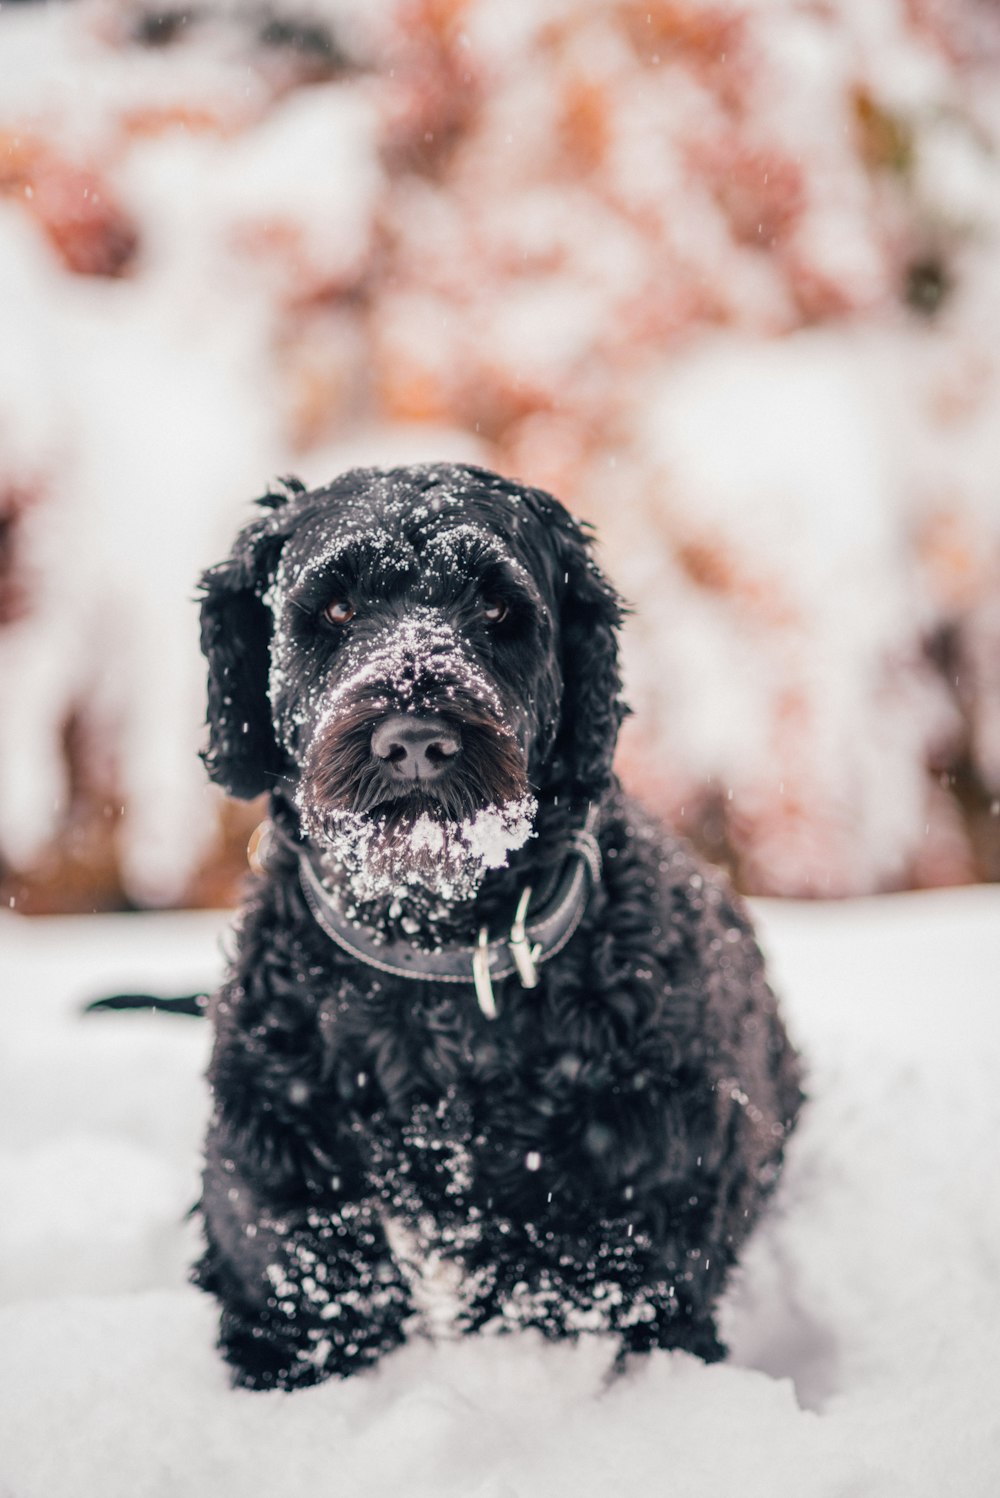 a small black dog sitting in the snow